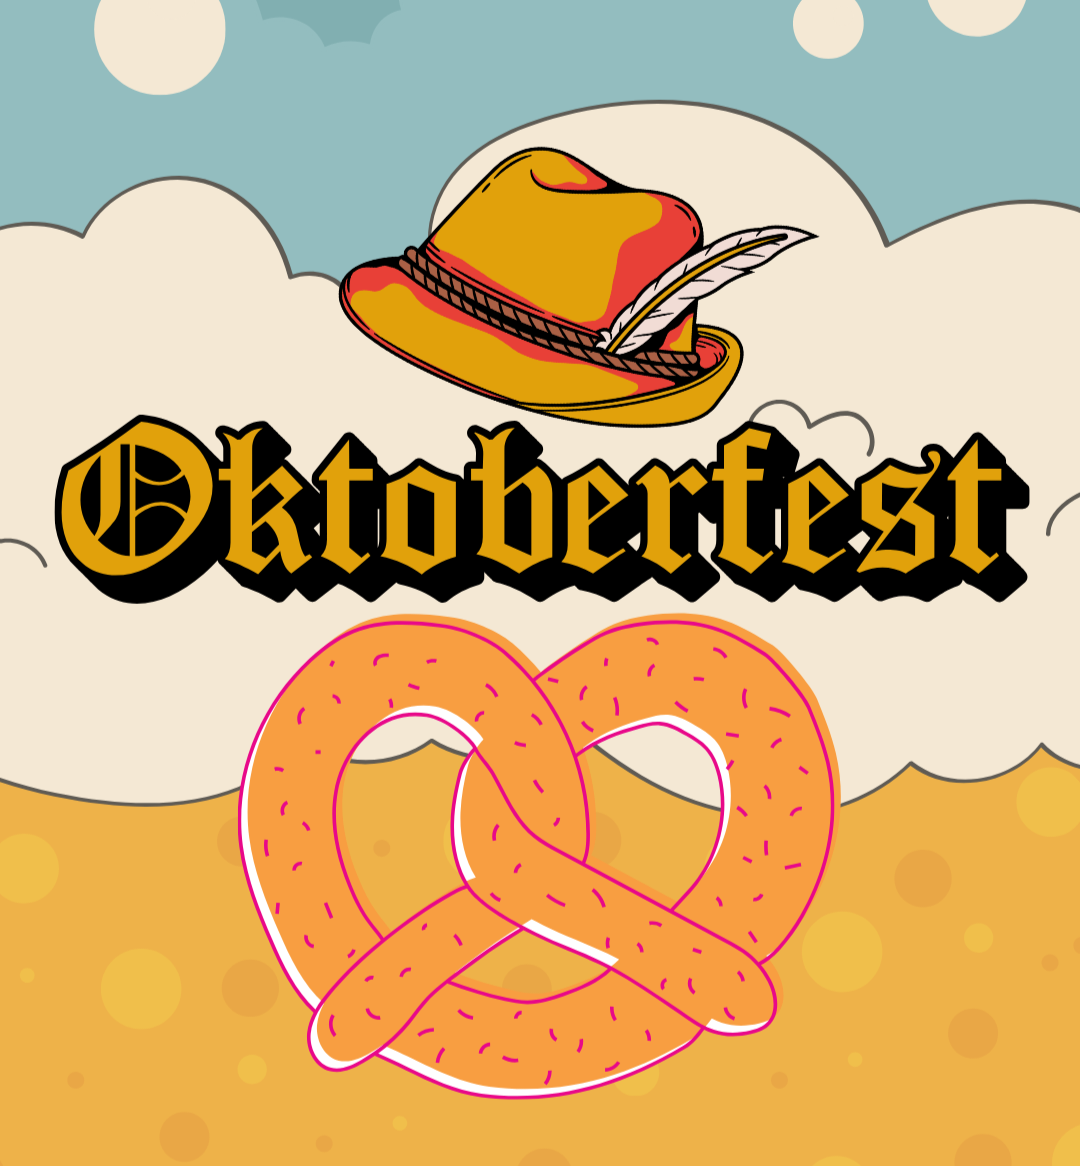 West+Liberty+University+Hosts+%E2%80%9COktoberfest%E2%80%9D+for+Students+and+Faculty